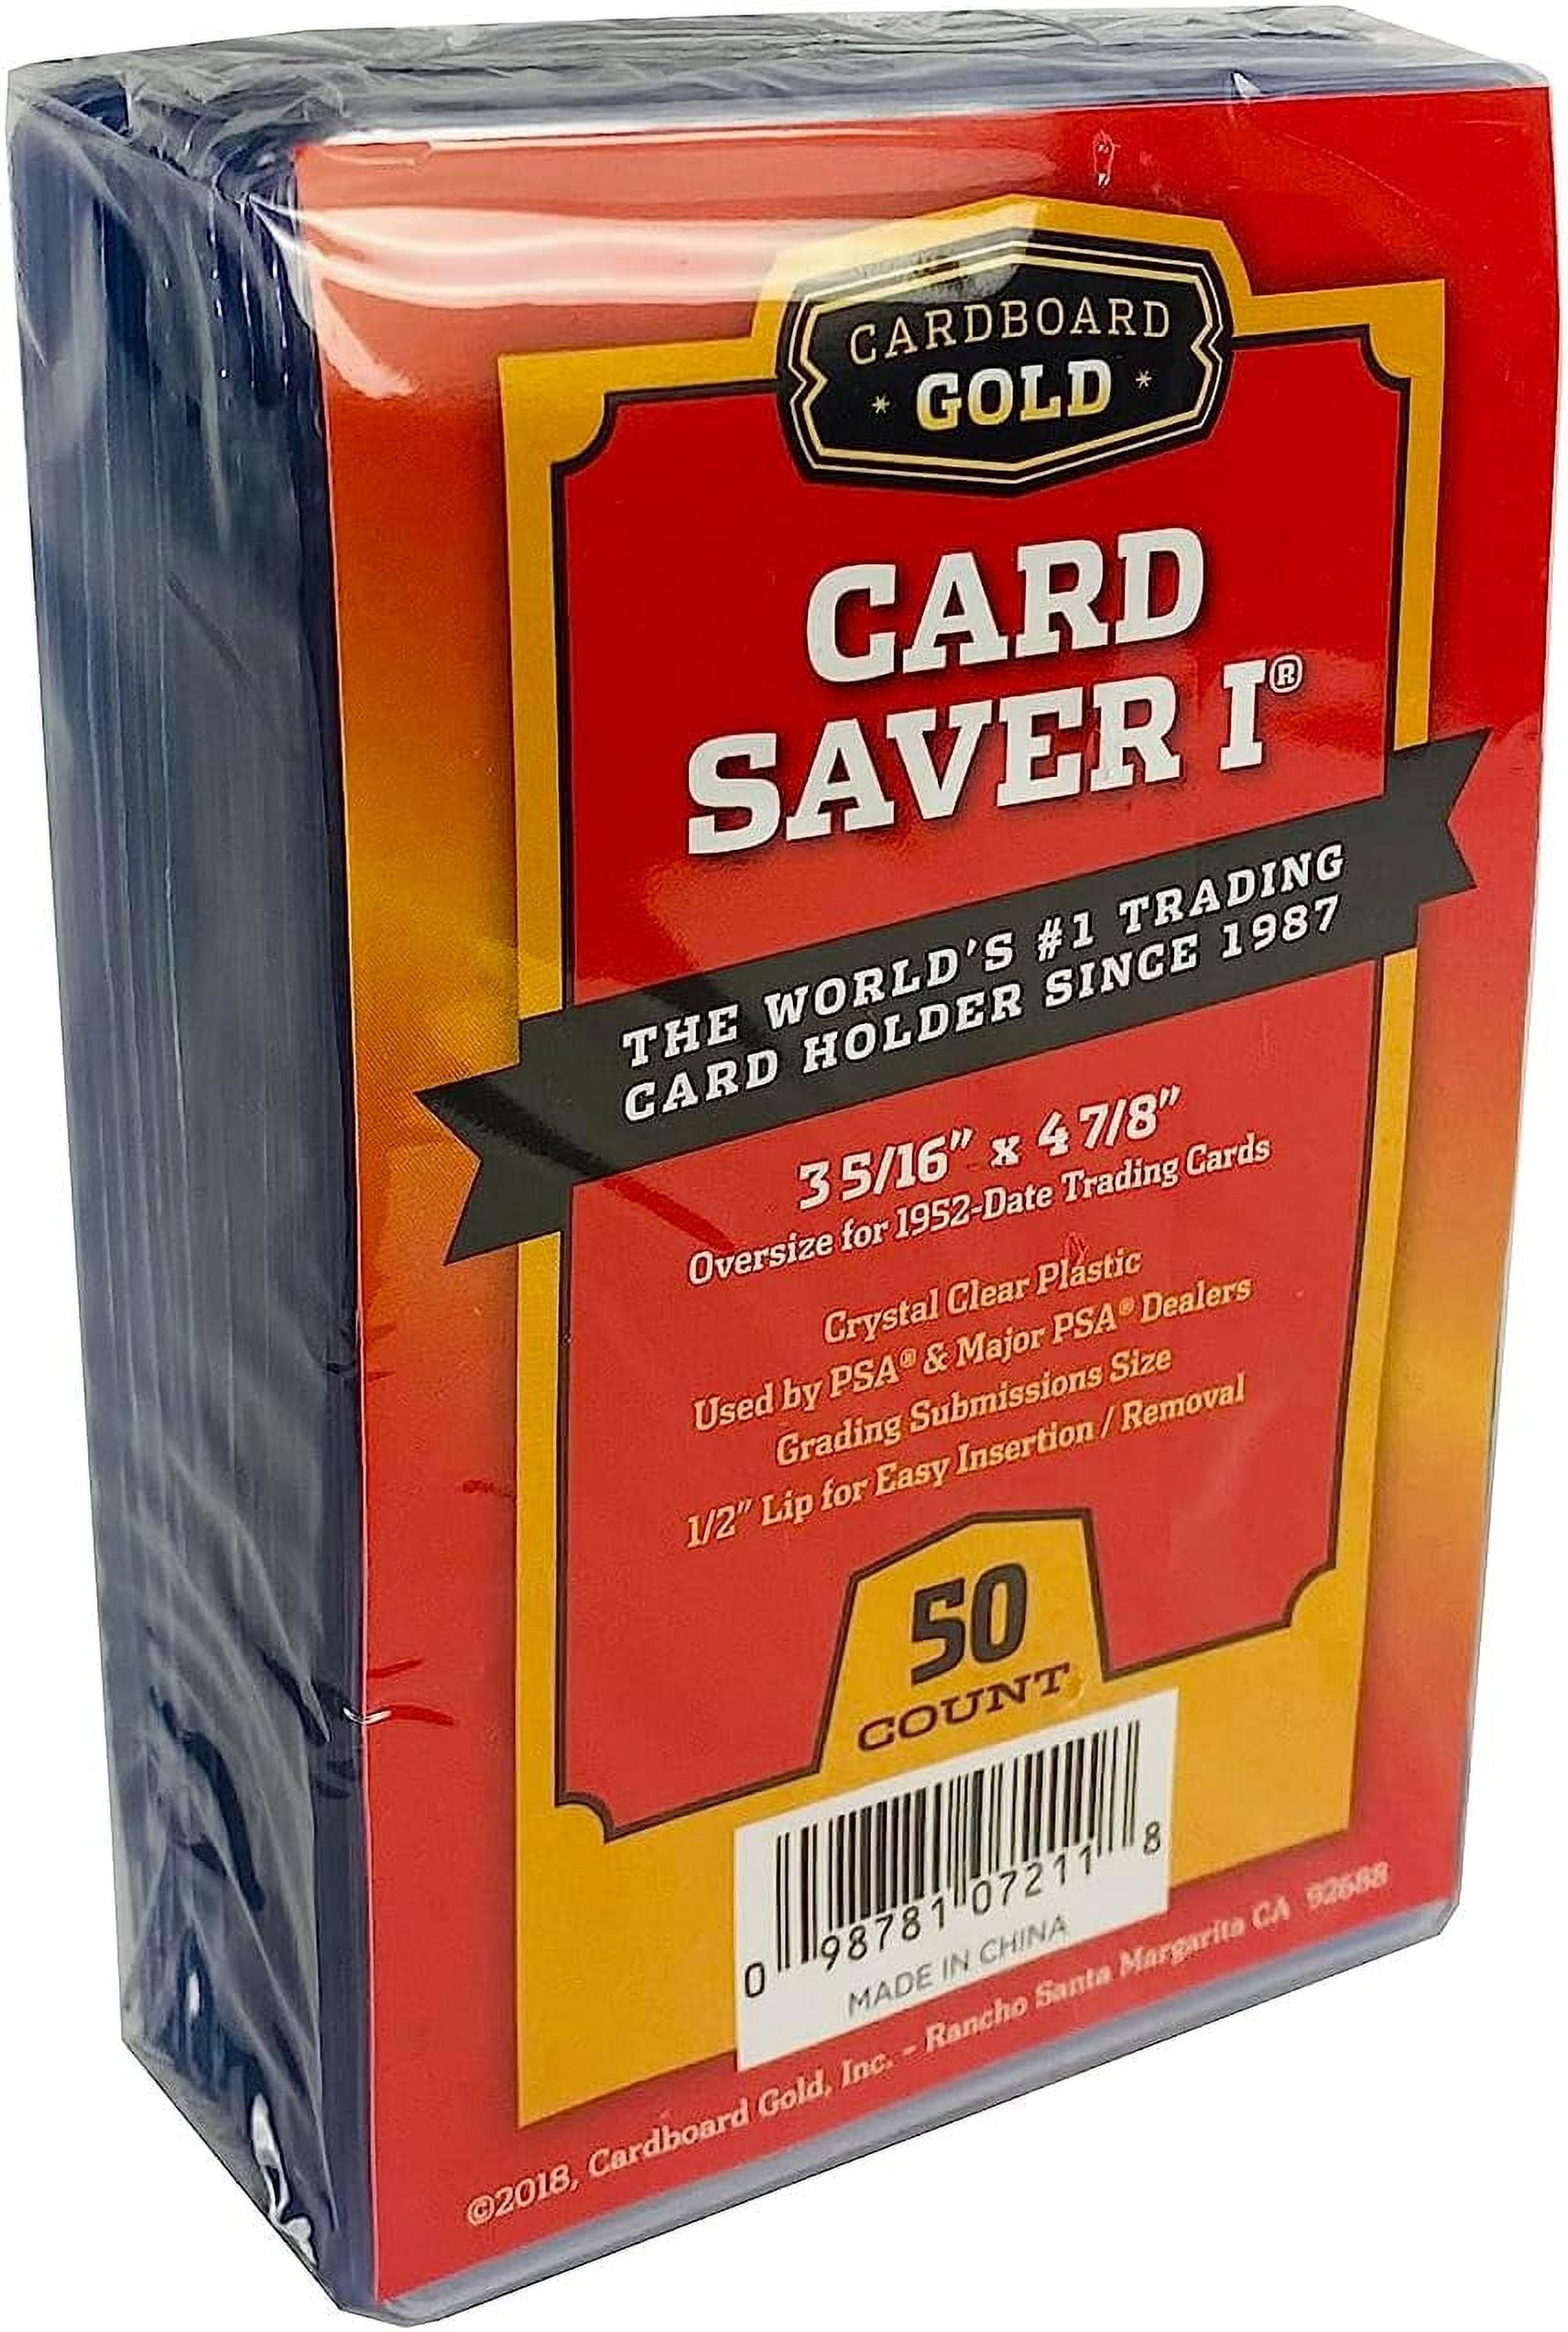 Card Saver 1 - Semi Rigid Card Holder for Graded Card Submittions - 50ct  Pack (1)